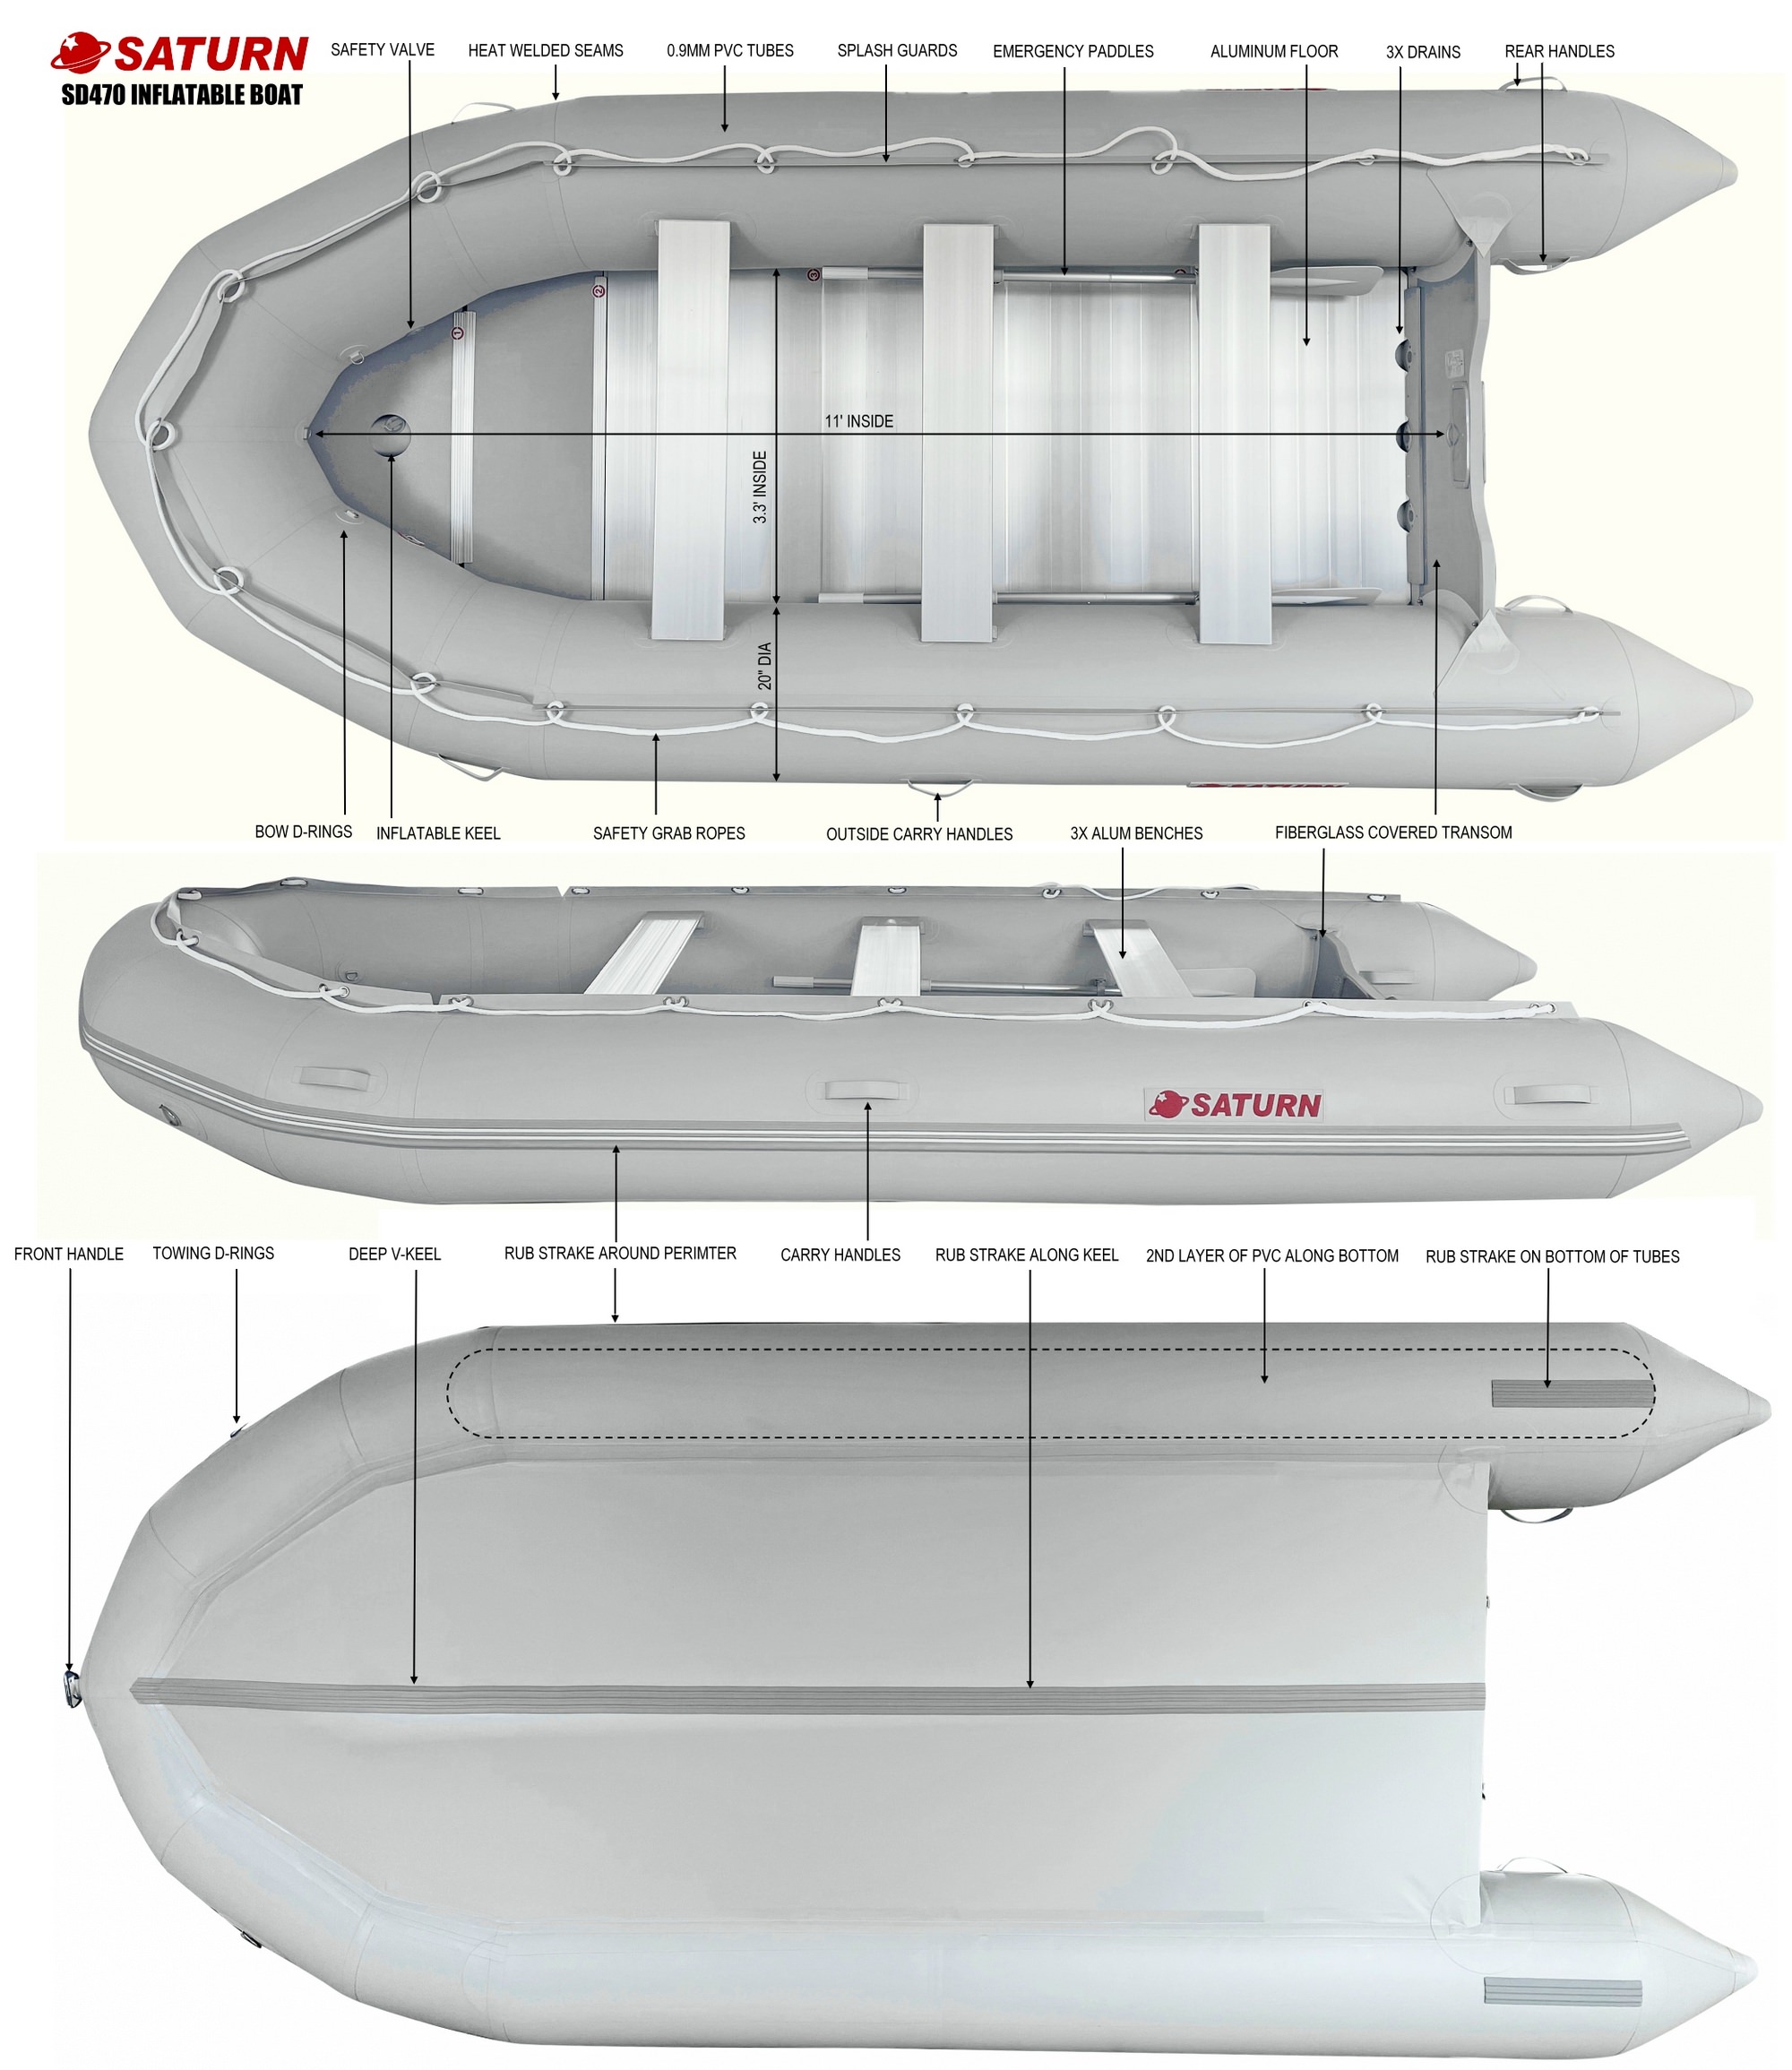 Saturn SD470 inflatable motor boat specifications